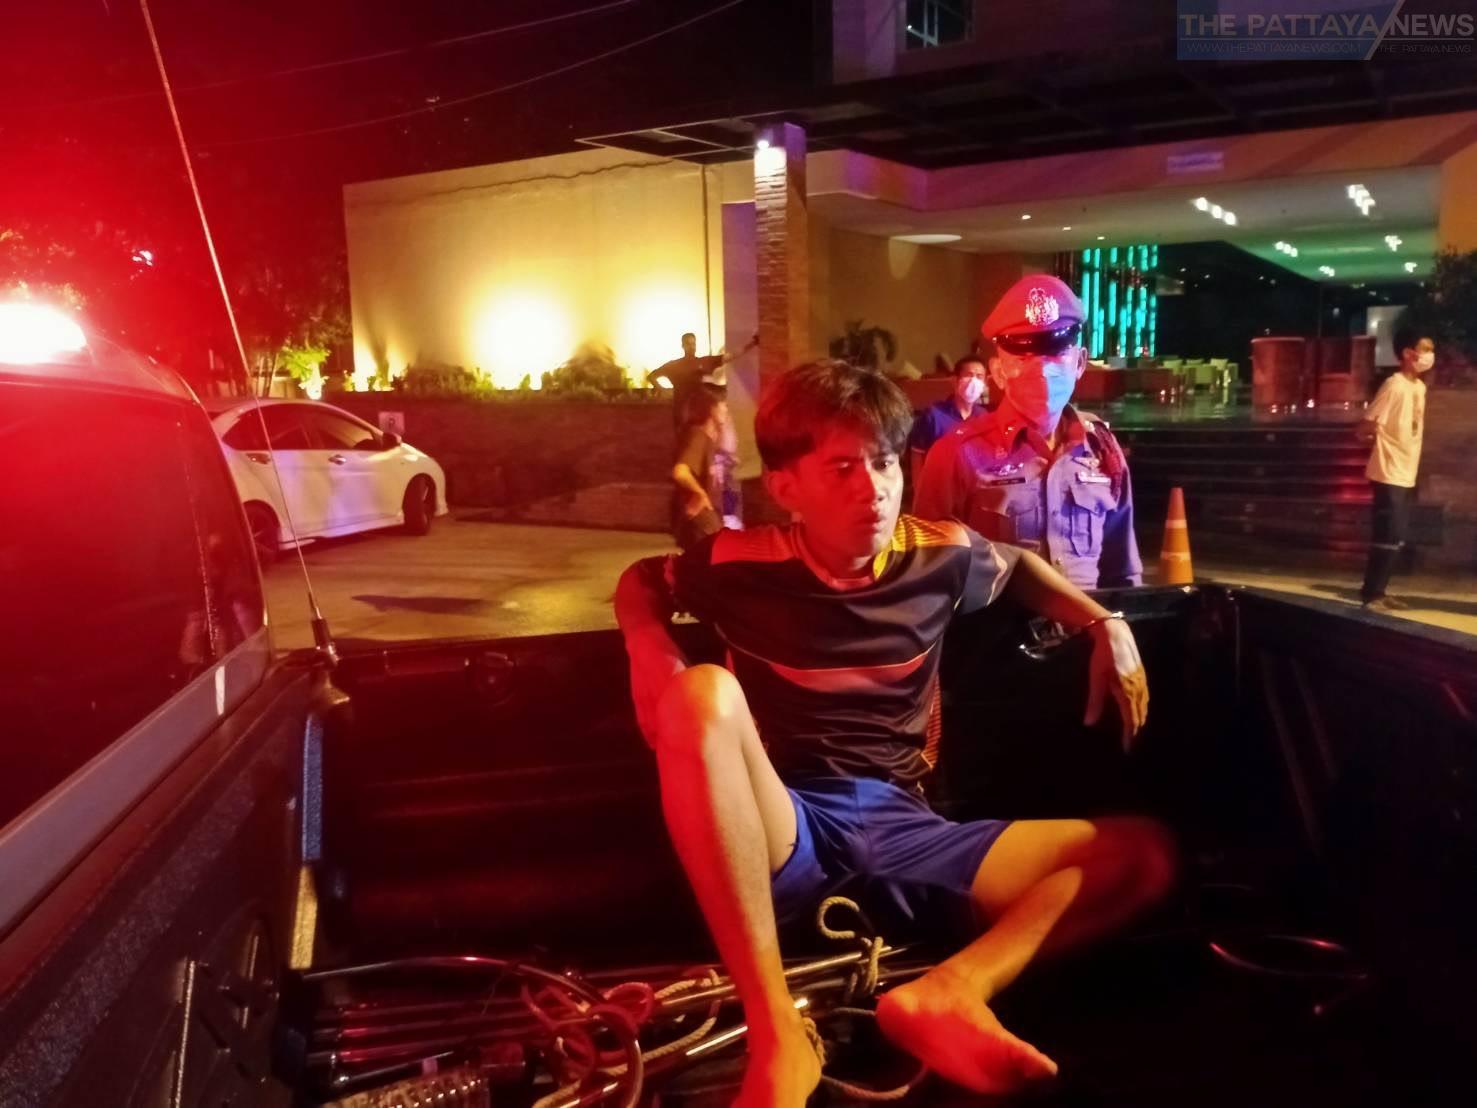 Young man arrested for attacking motorcycle taxi rider after taxi rider allegedly made fun of his girlfriend’s looks in the Pattaya area